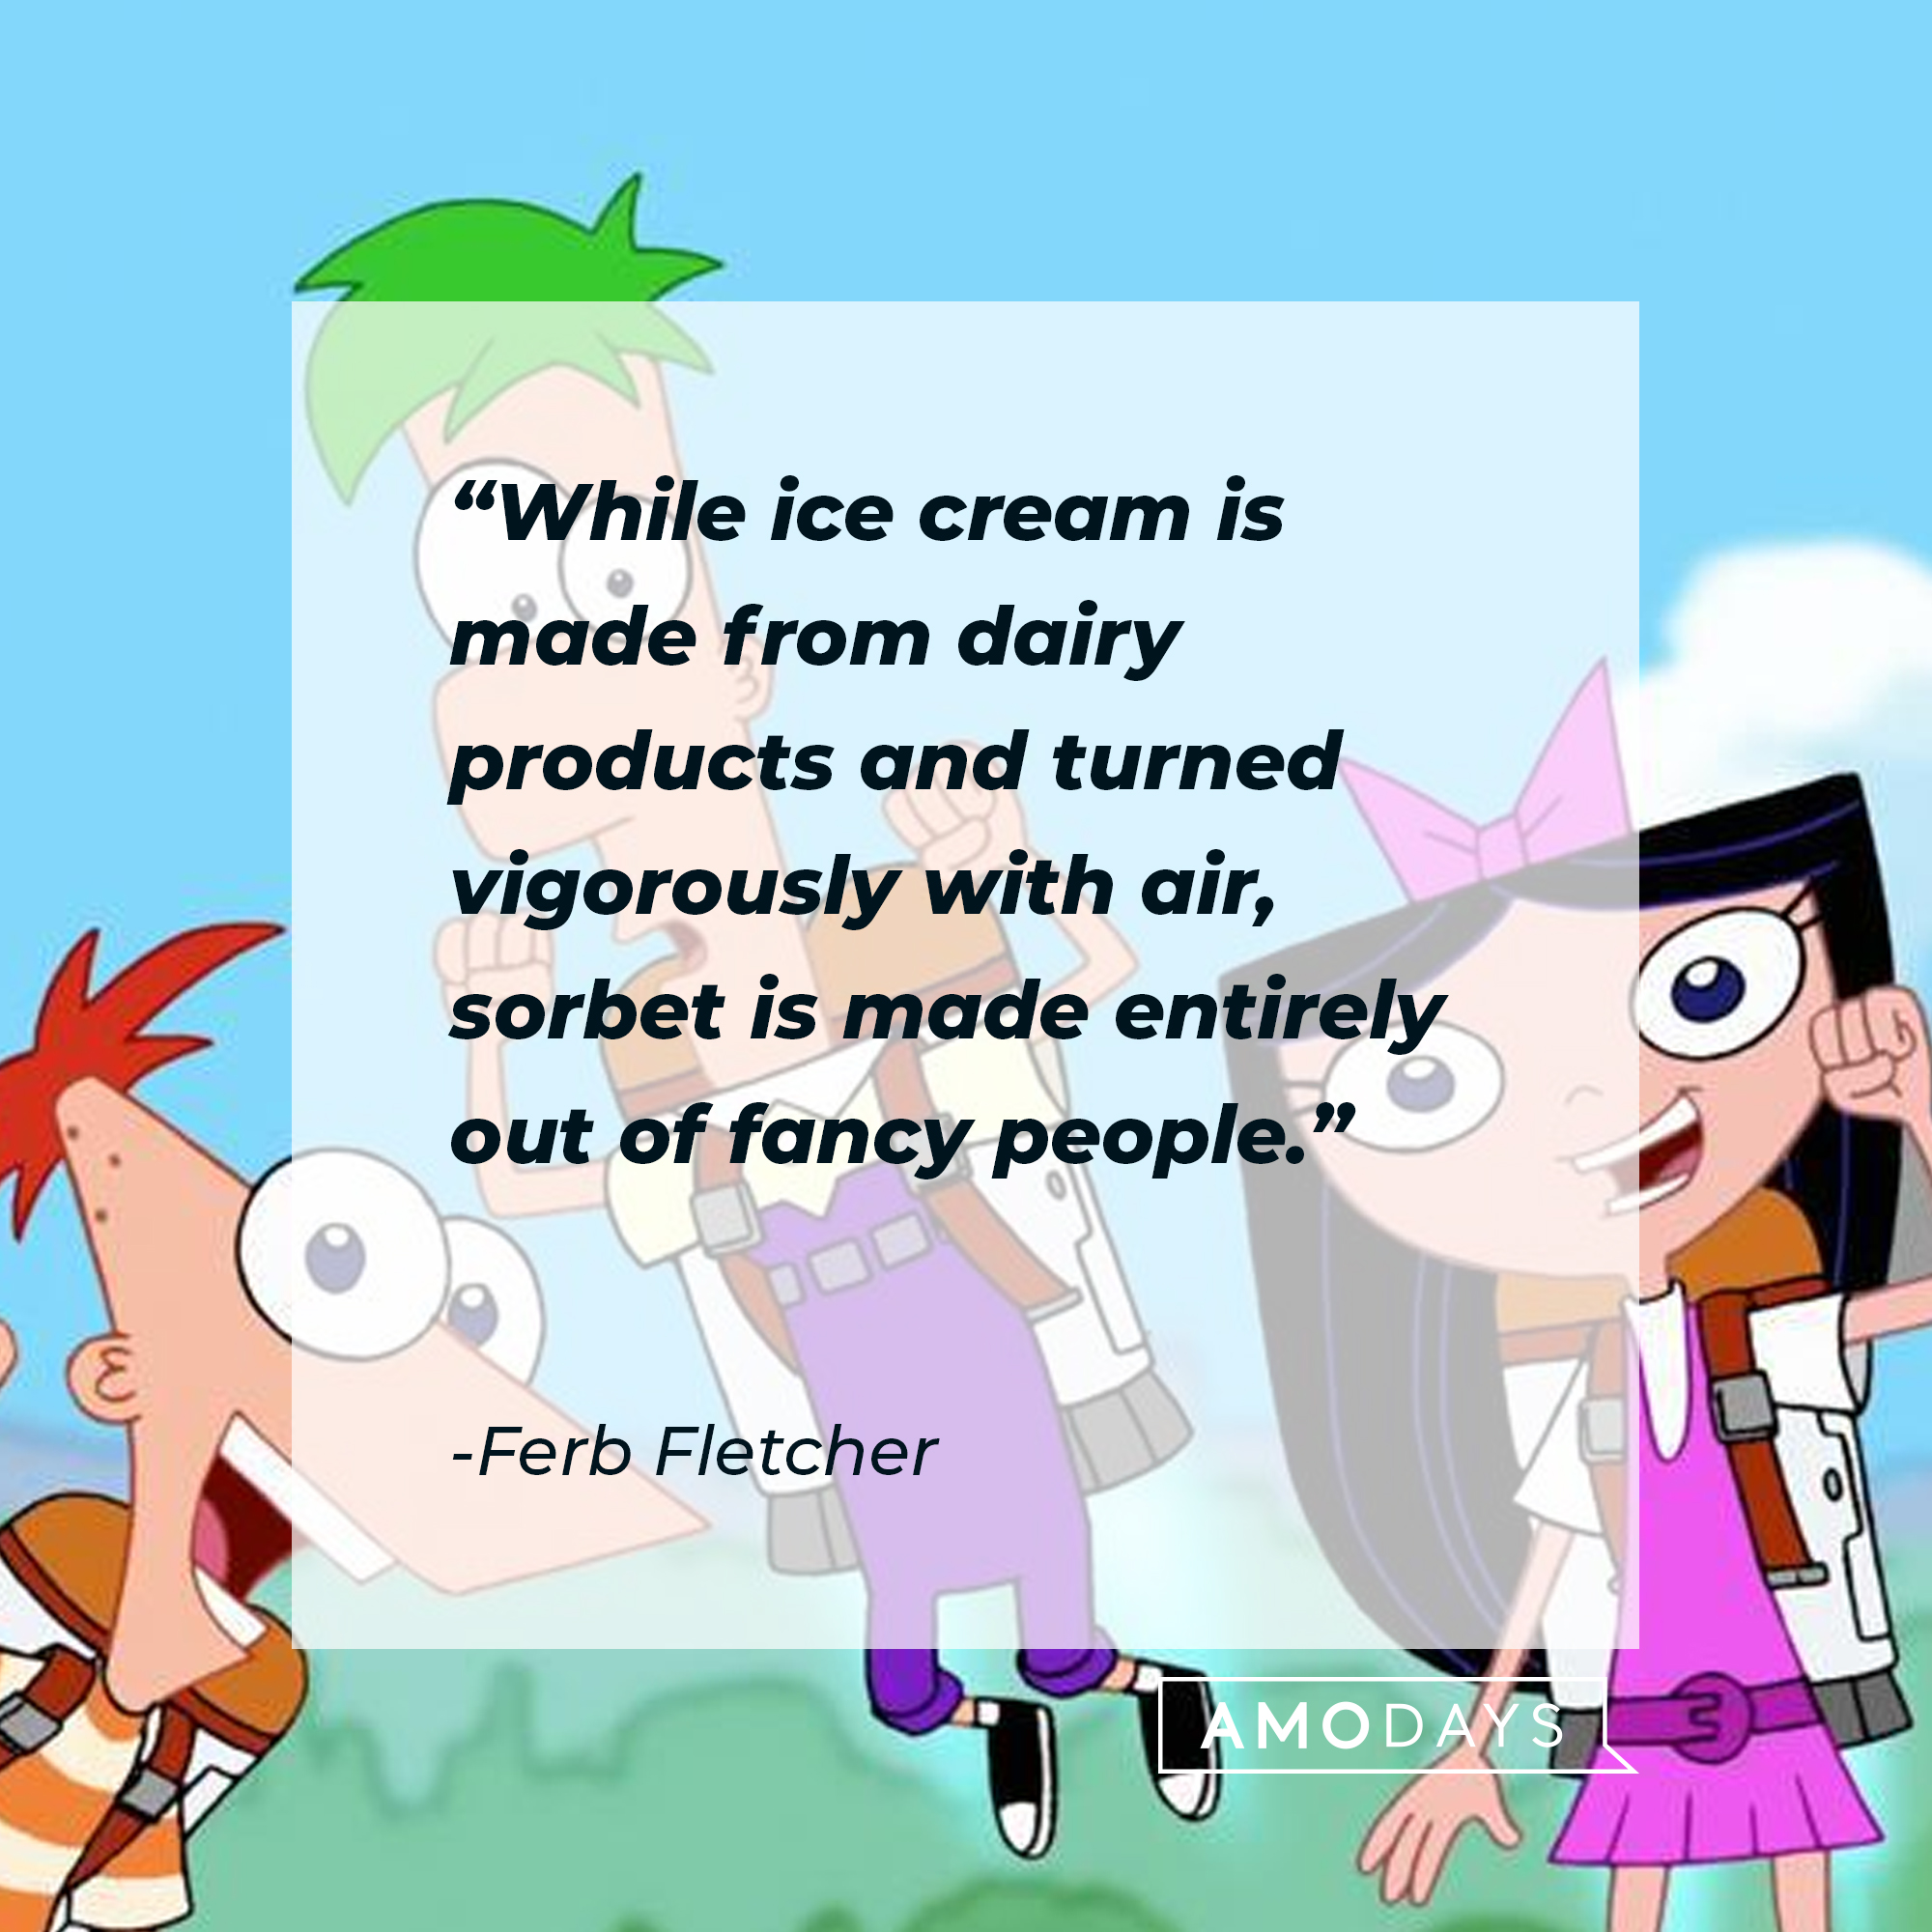 Ferb Fletcher's quote: "While ice cream is made from dairy products and turned vigorously with air, sorbet is made entirely out of fancy people." | Source: facebook.com/Phineas-and-Ferb